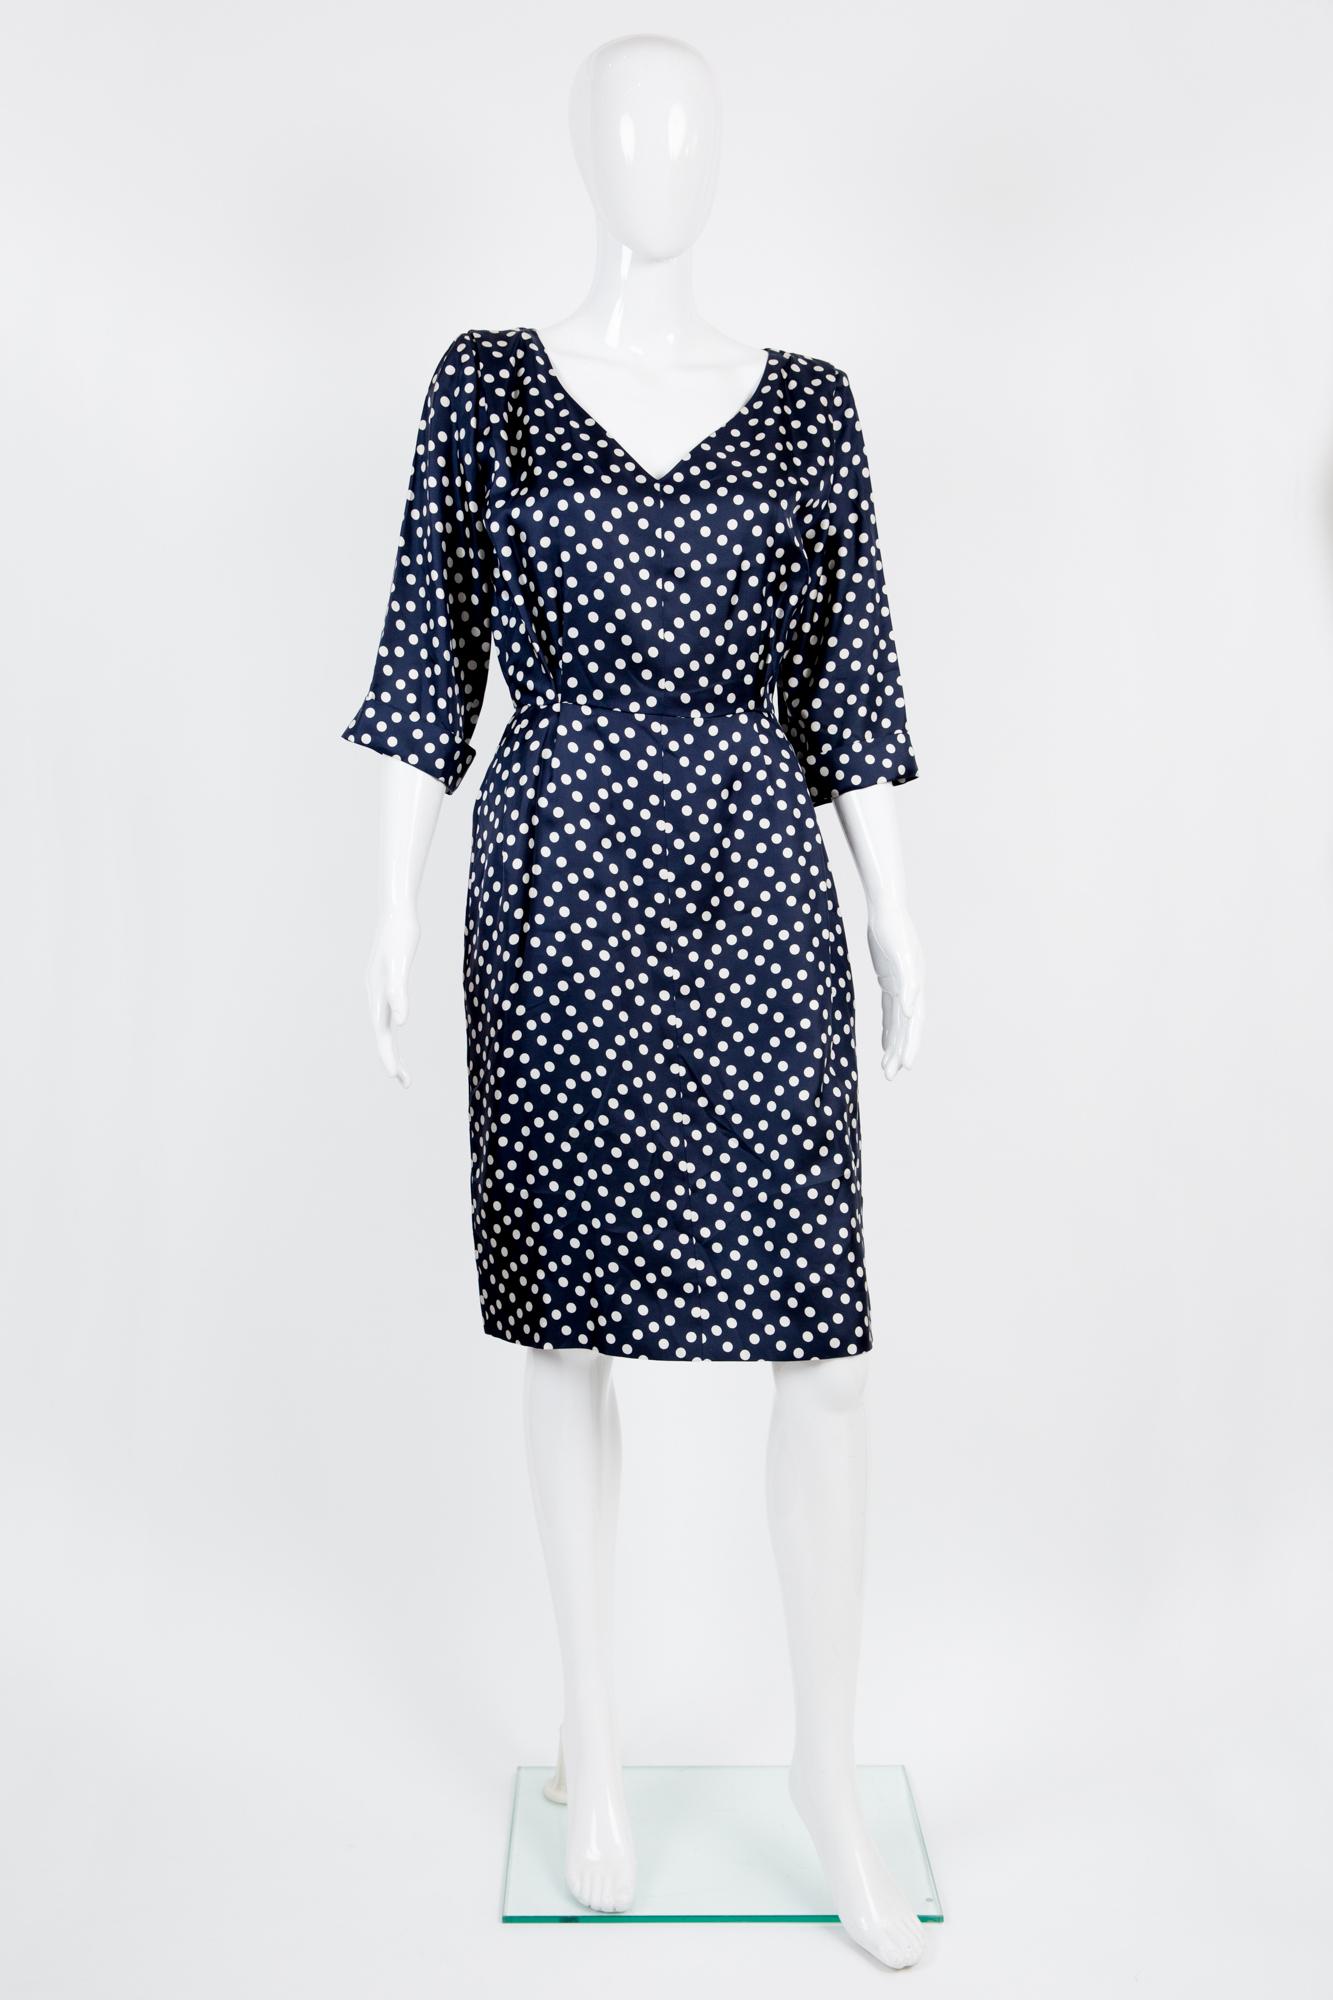 Yves Saint Laurent silk dress featuring a polka dot print, 3/4 sleeves with a turn cuff, a side zip opening. 
100% silk
In excellent vintage condition. Made in France. 
Estimated size 36fr/ US4/ UK8
We guarantee you will receive this gorgeous item